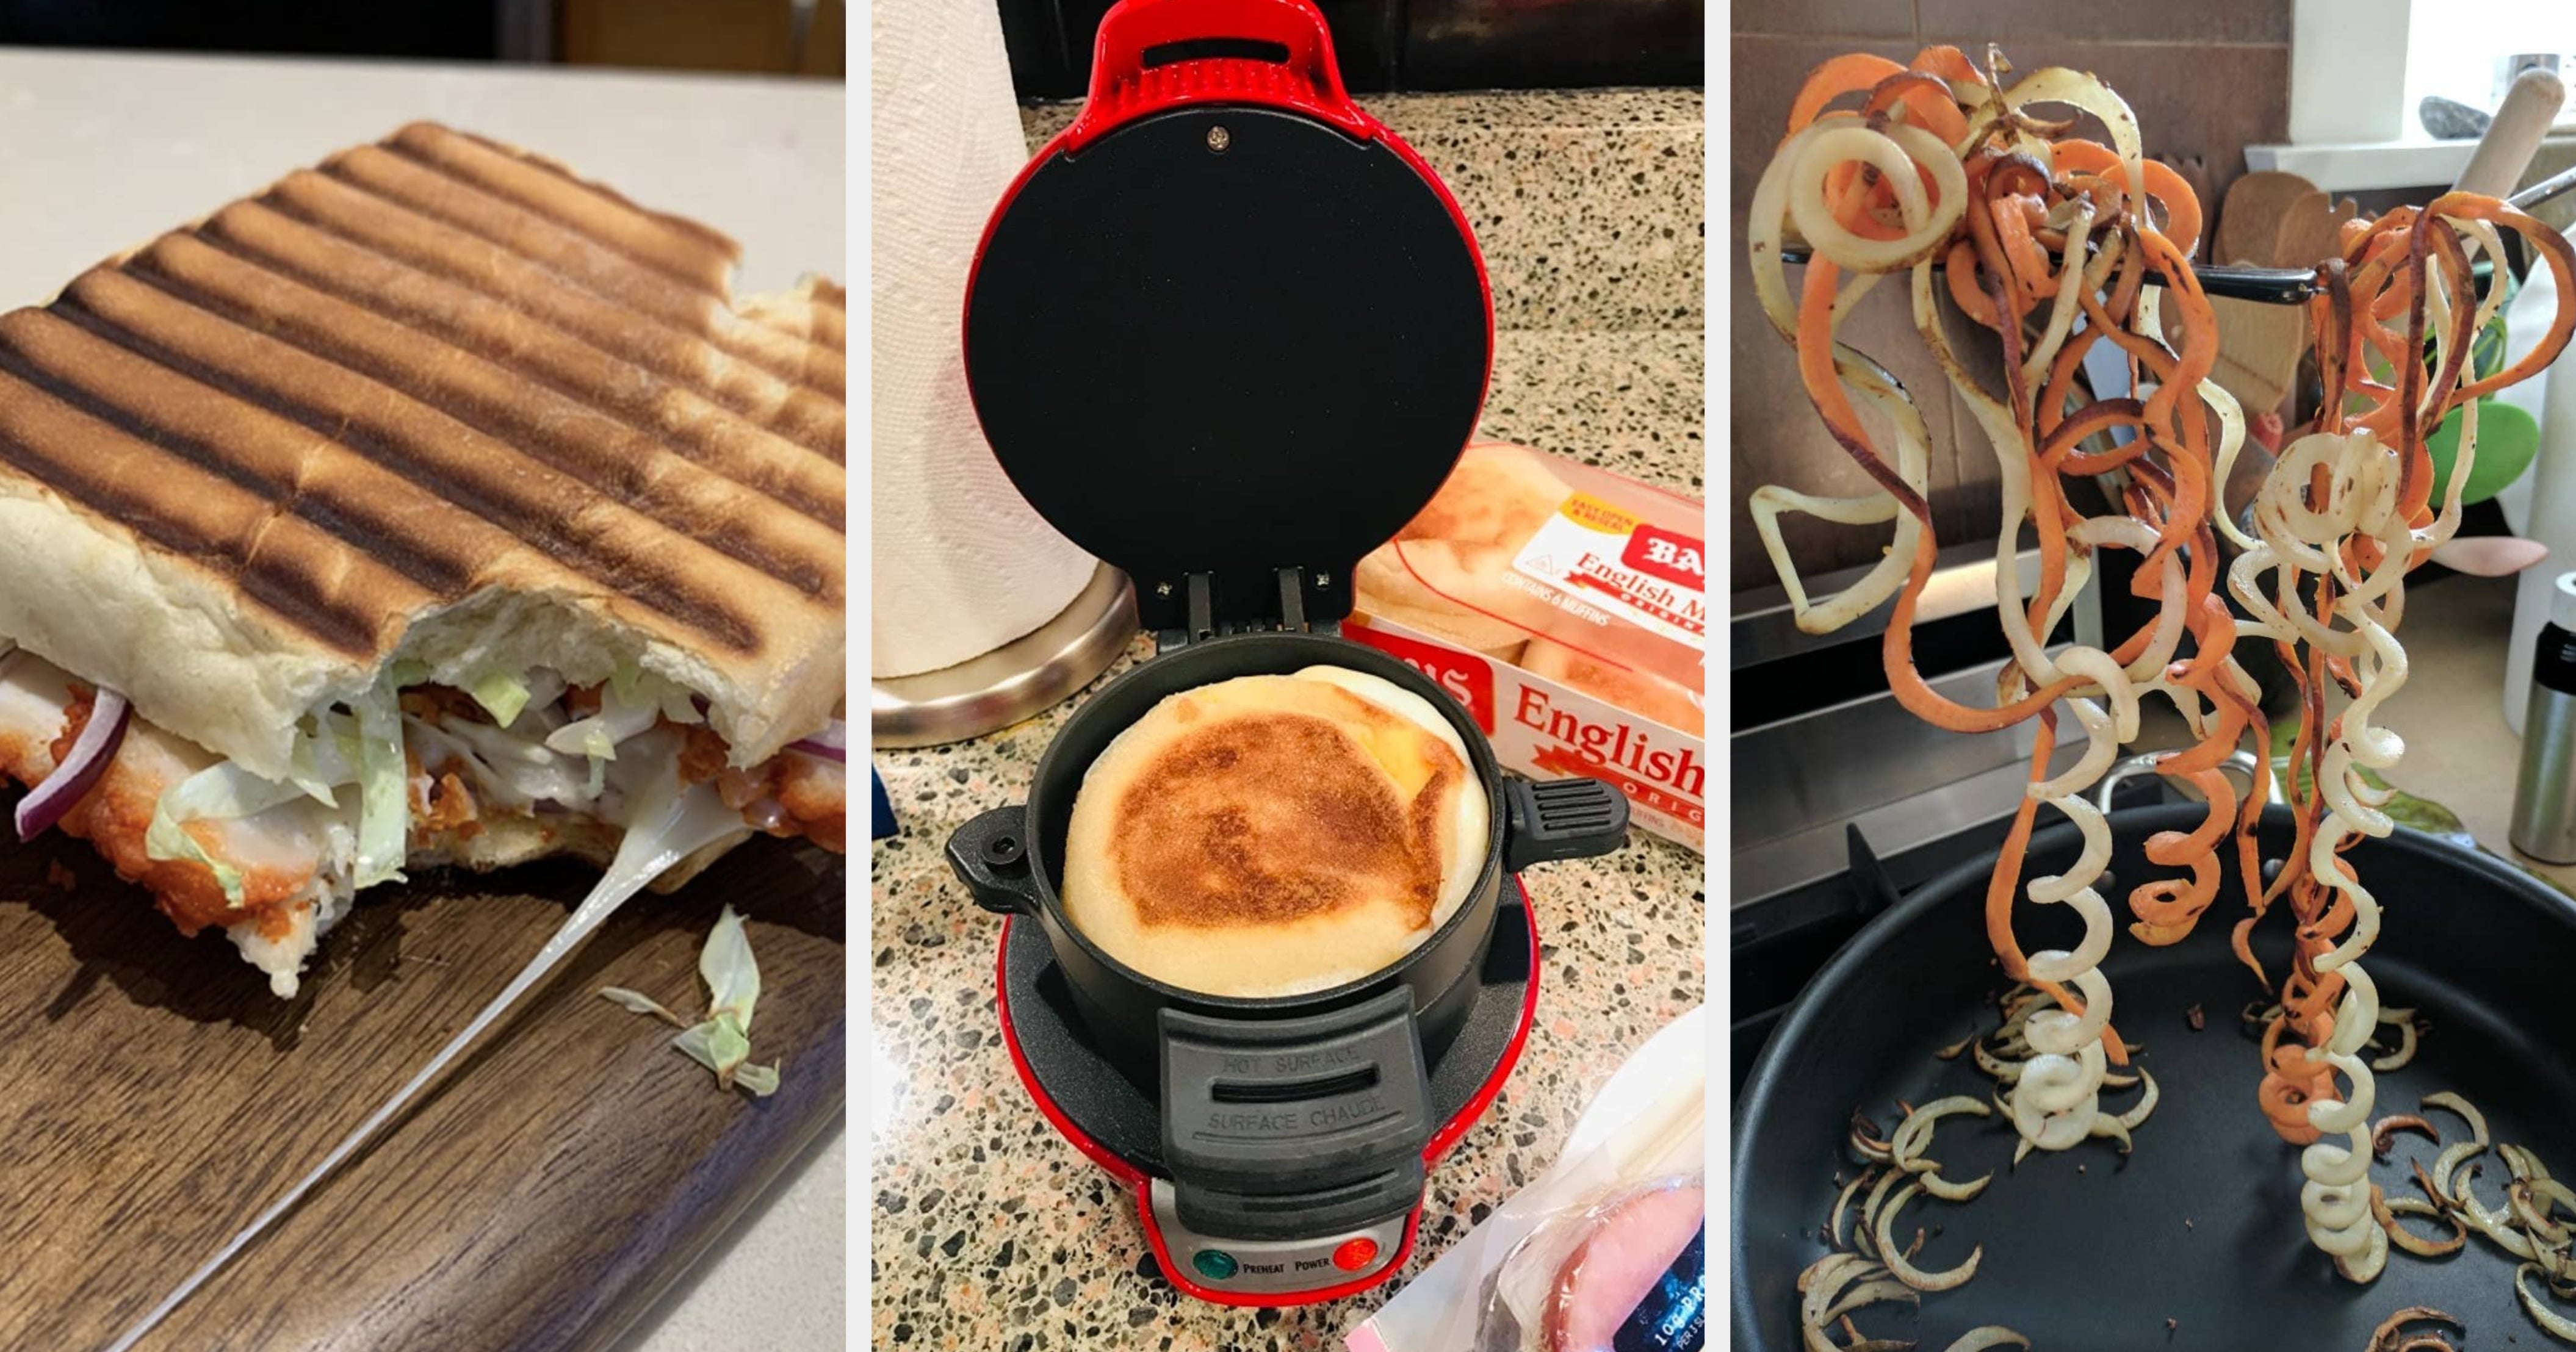 Kitchen Appliances and Accessories for People Who Hate Cooking